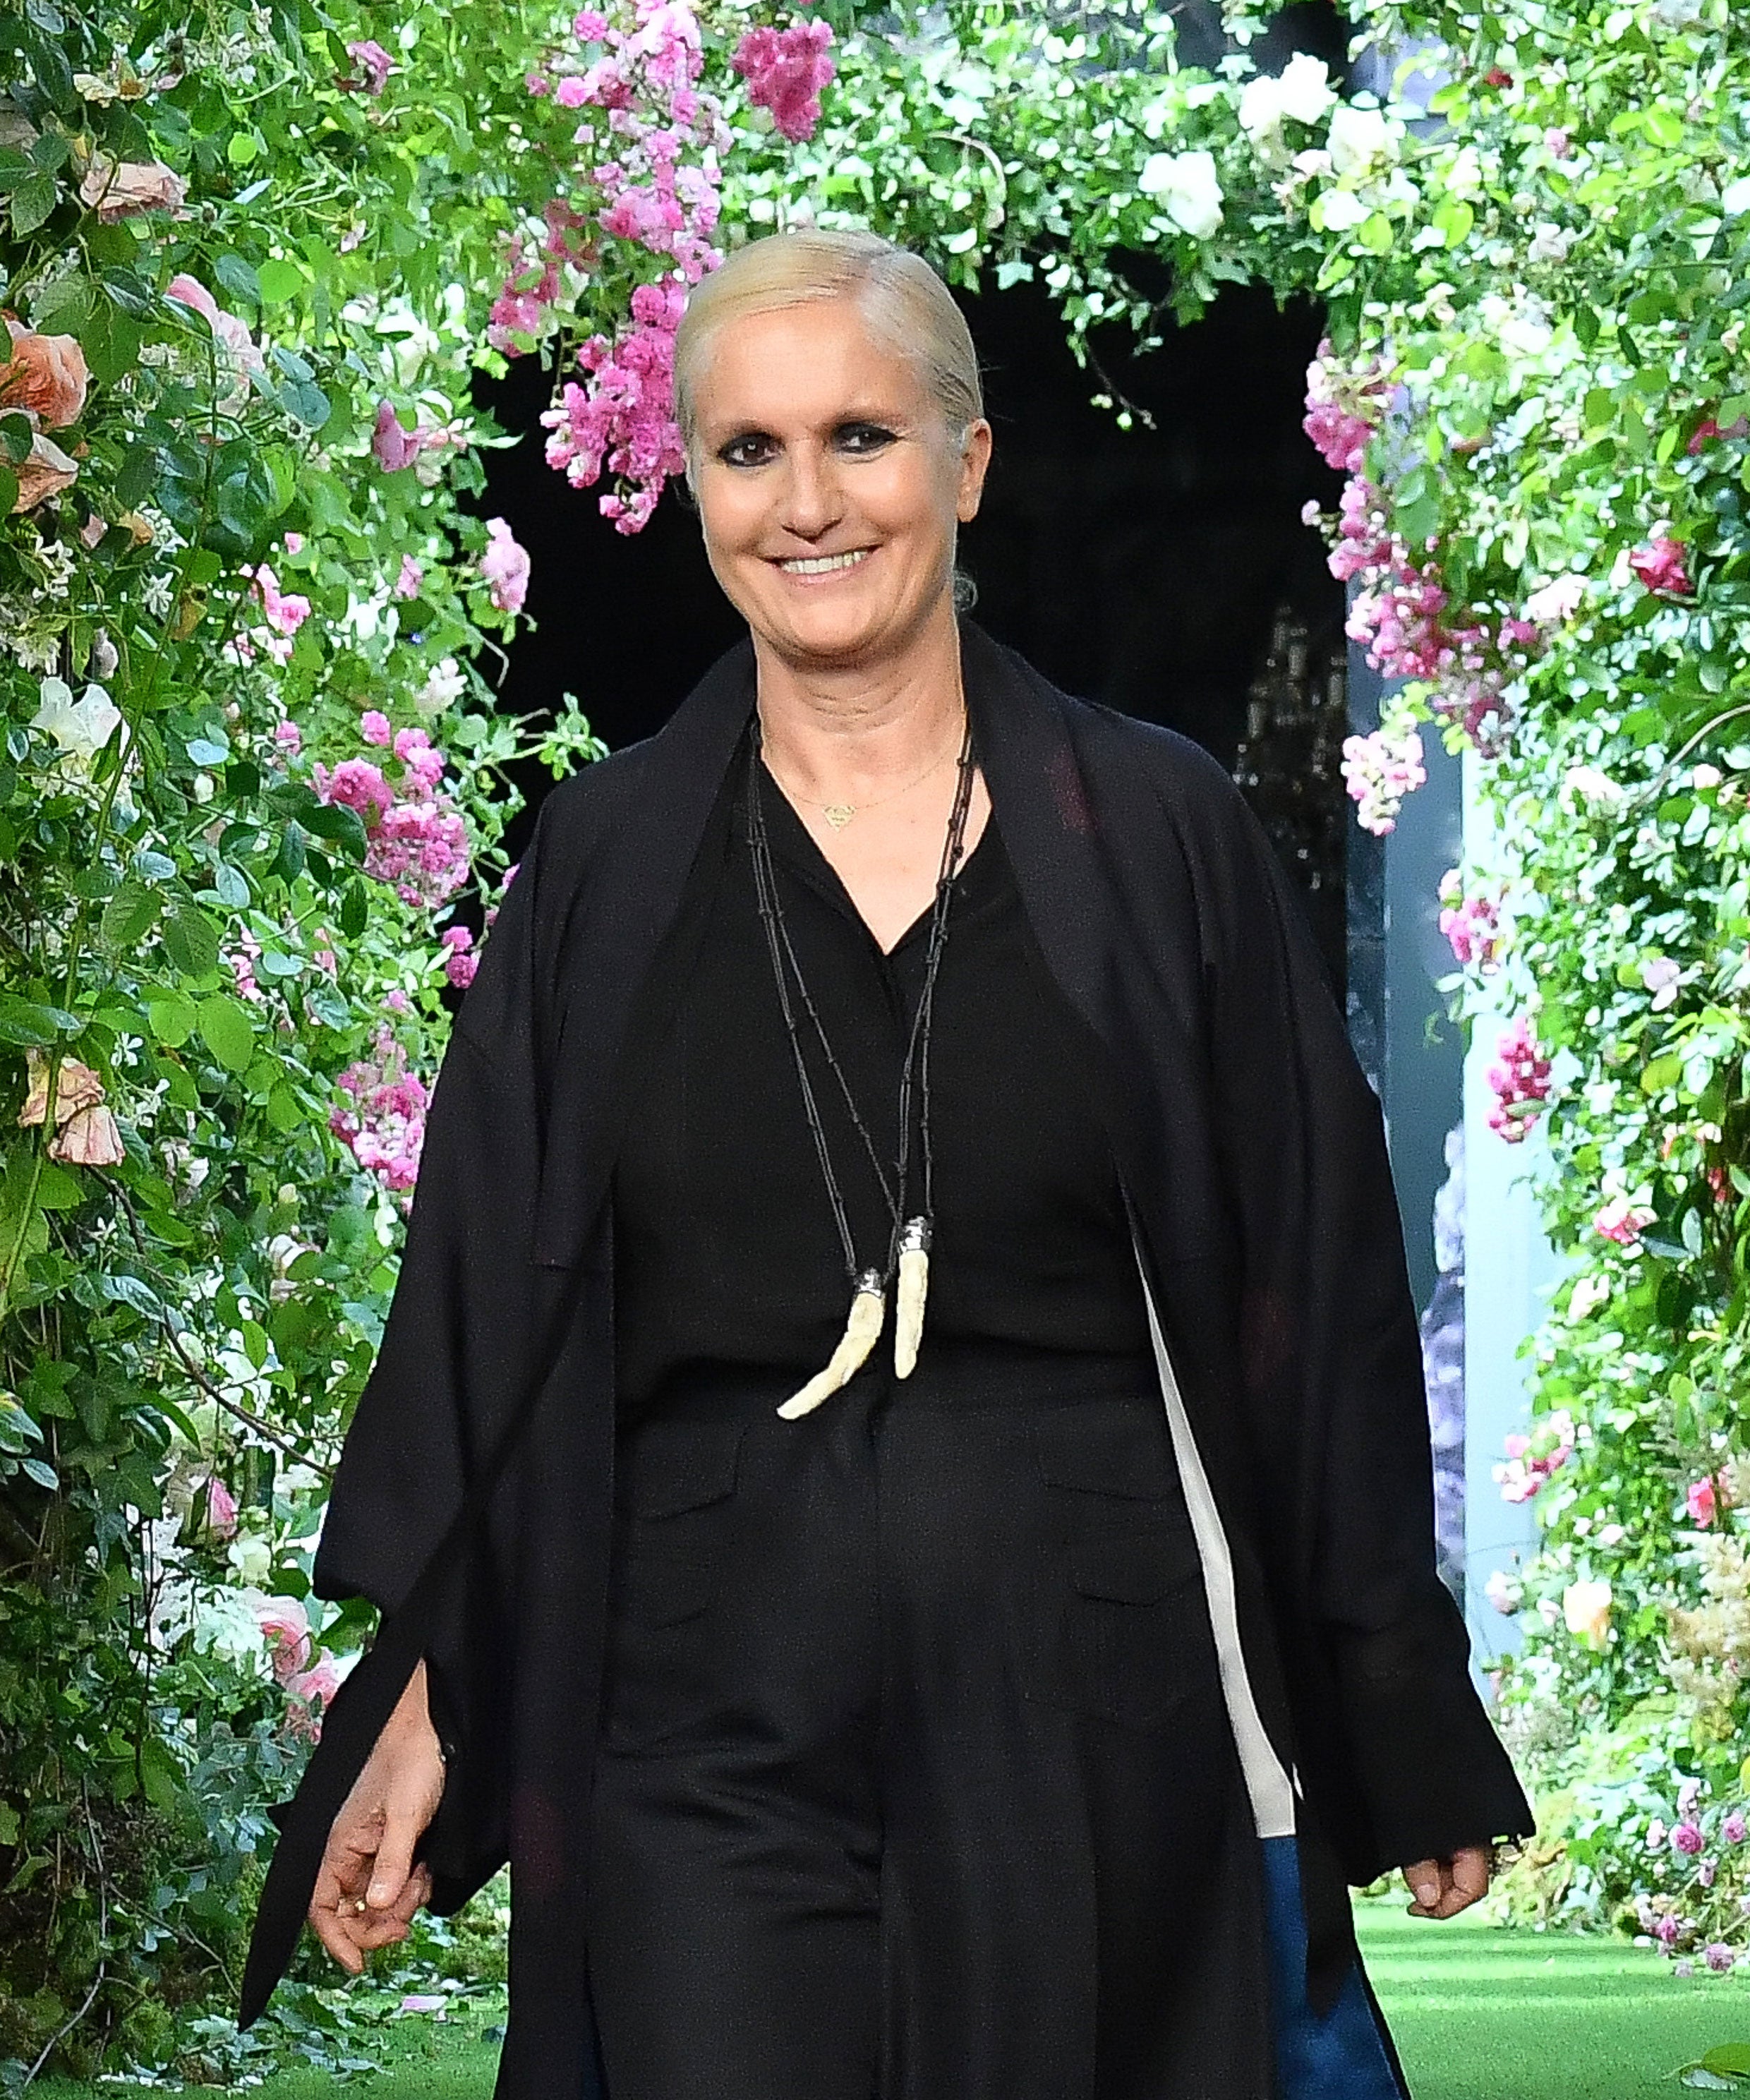 The Most Influential Female Fashion Designers In 2020